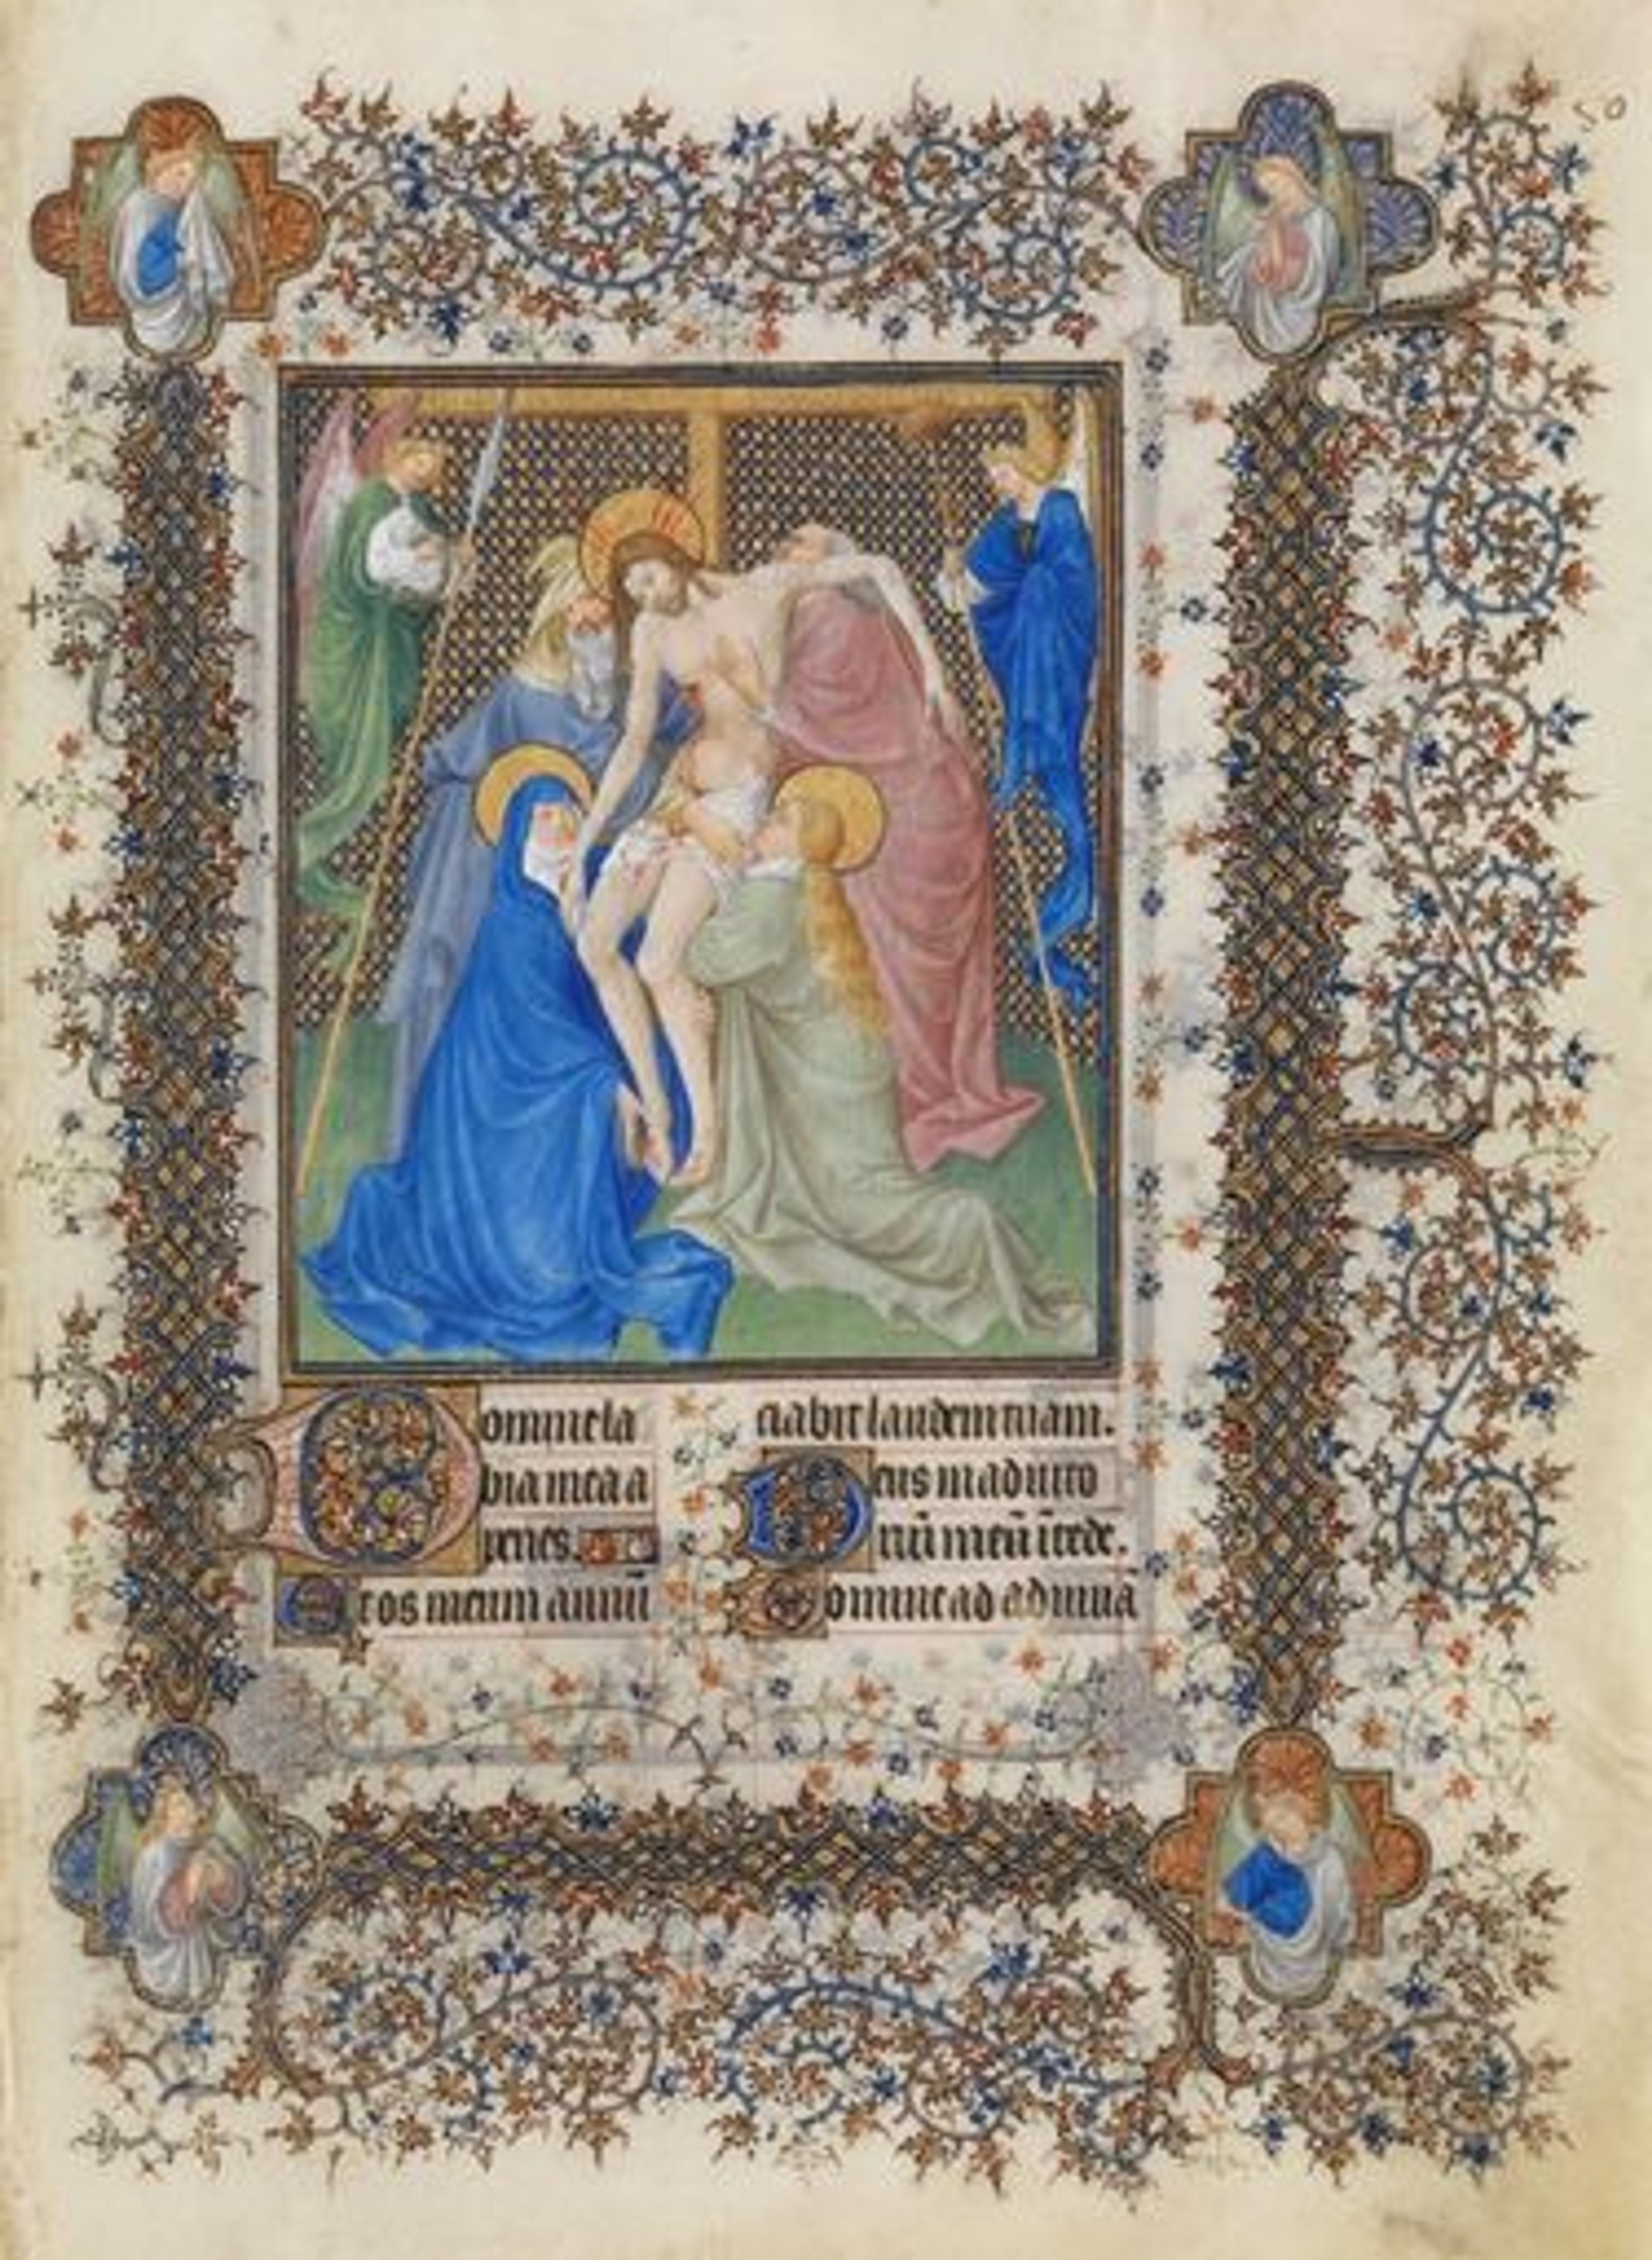 Folio from an illuminated manuscript depicting Christ's descent from the Cross